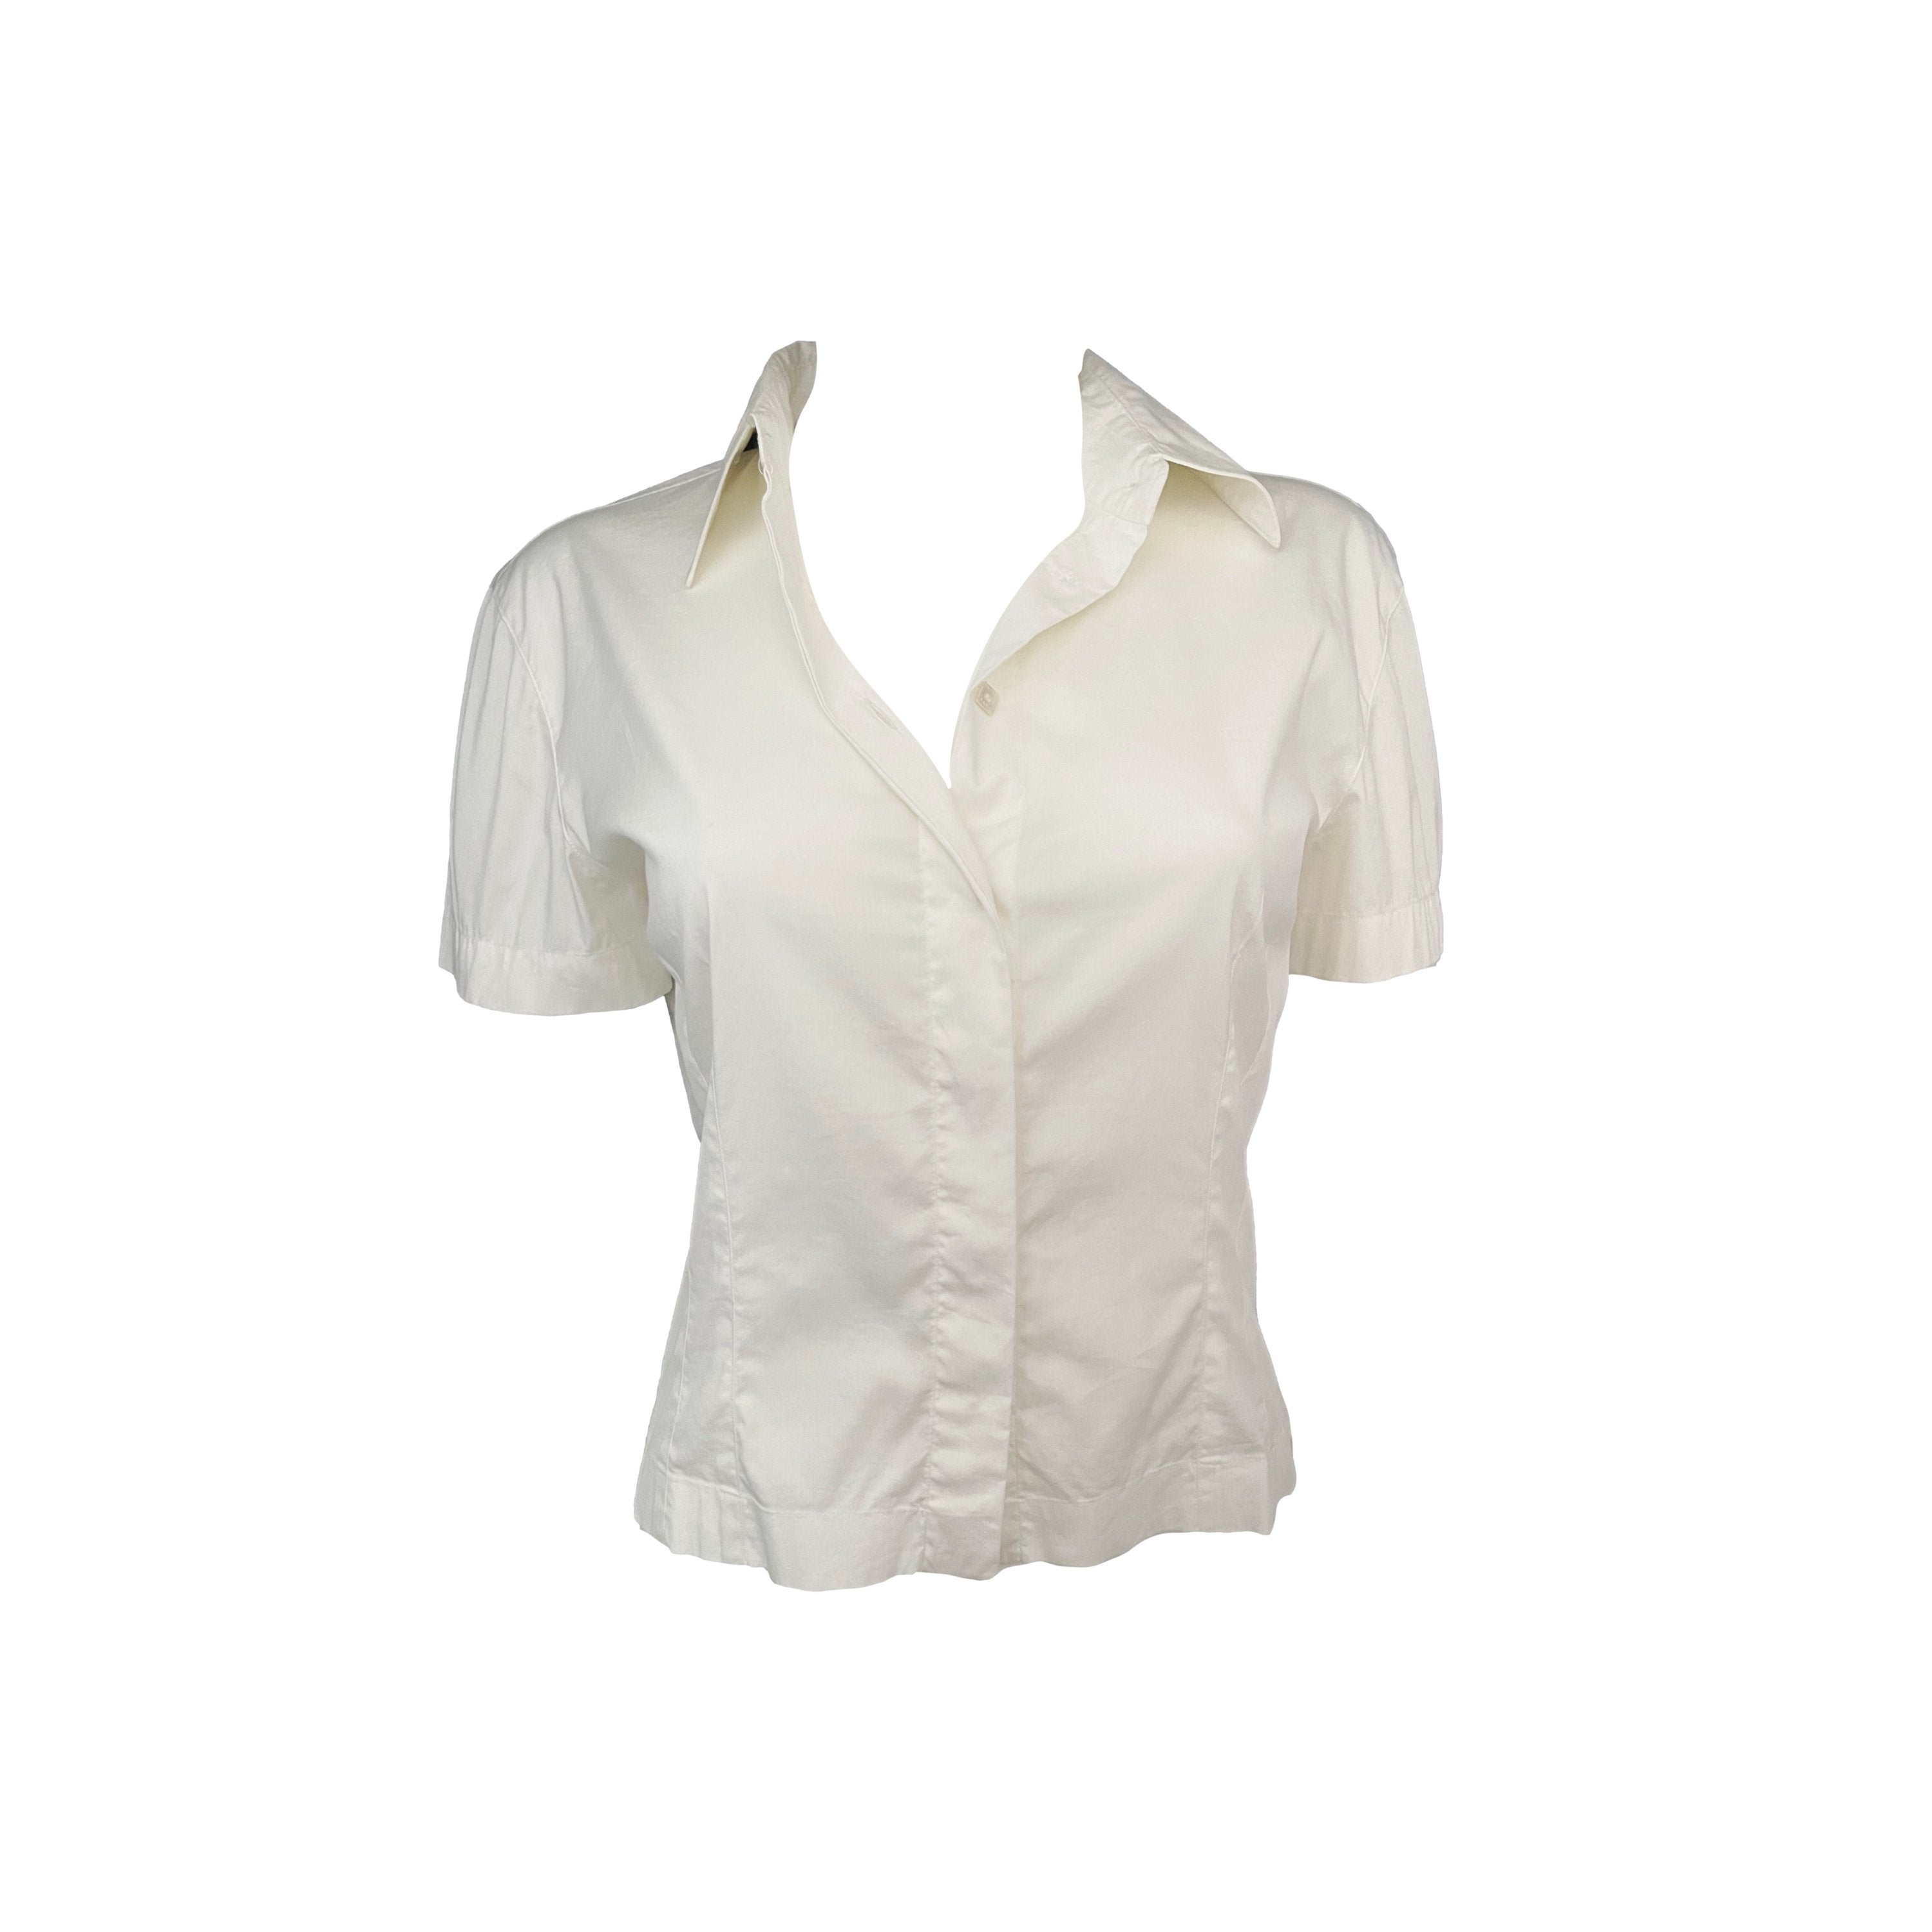 Chanel cropped white shirt CHA NEL ASL3851